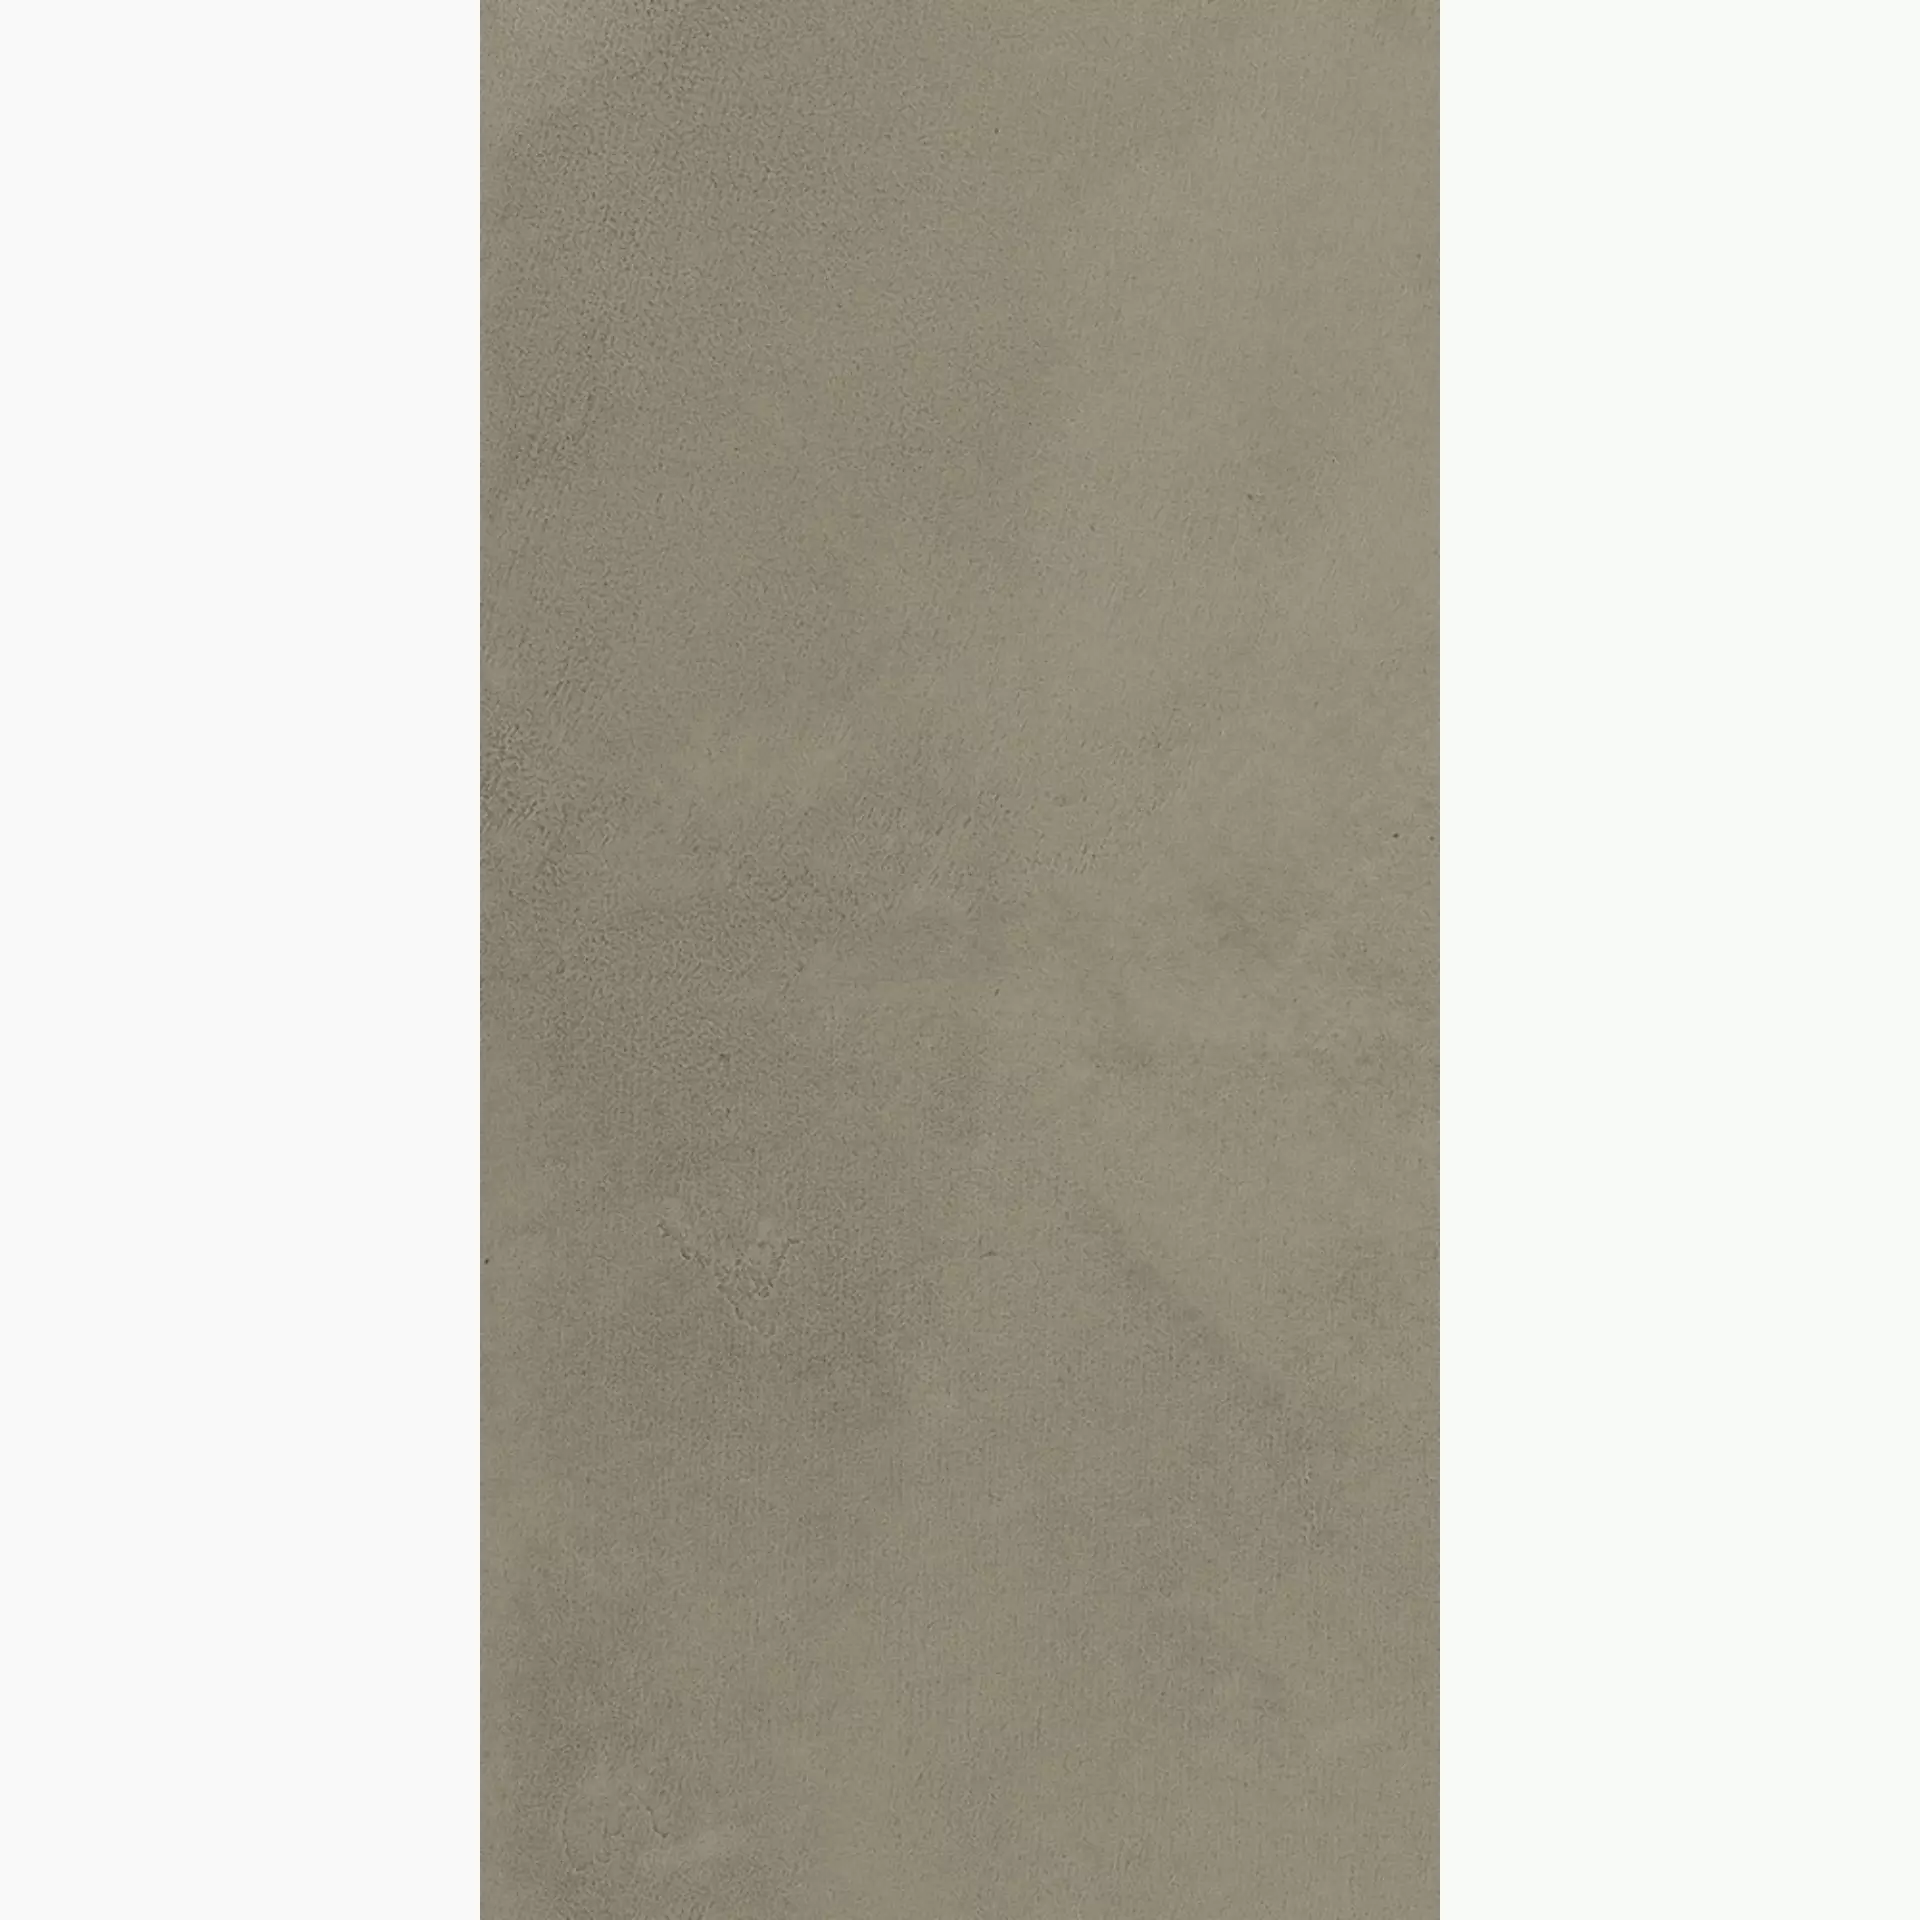 Mirage Clay Cl 03 Awake Naturale Stair plate A ARR7 30x60cm 9mm